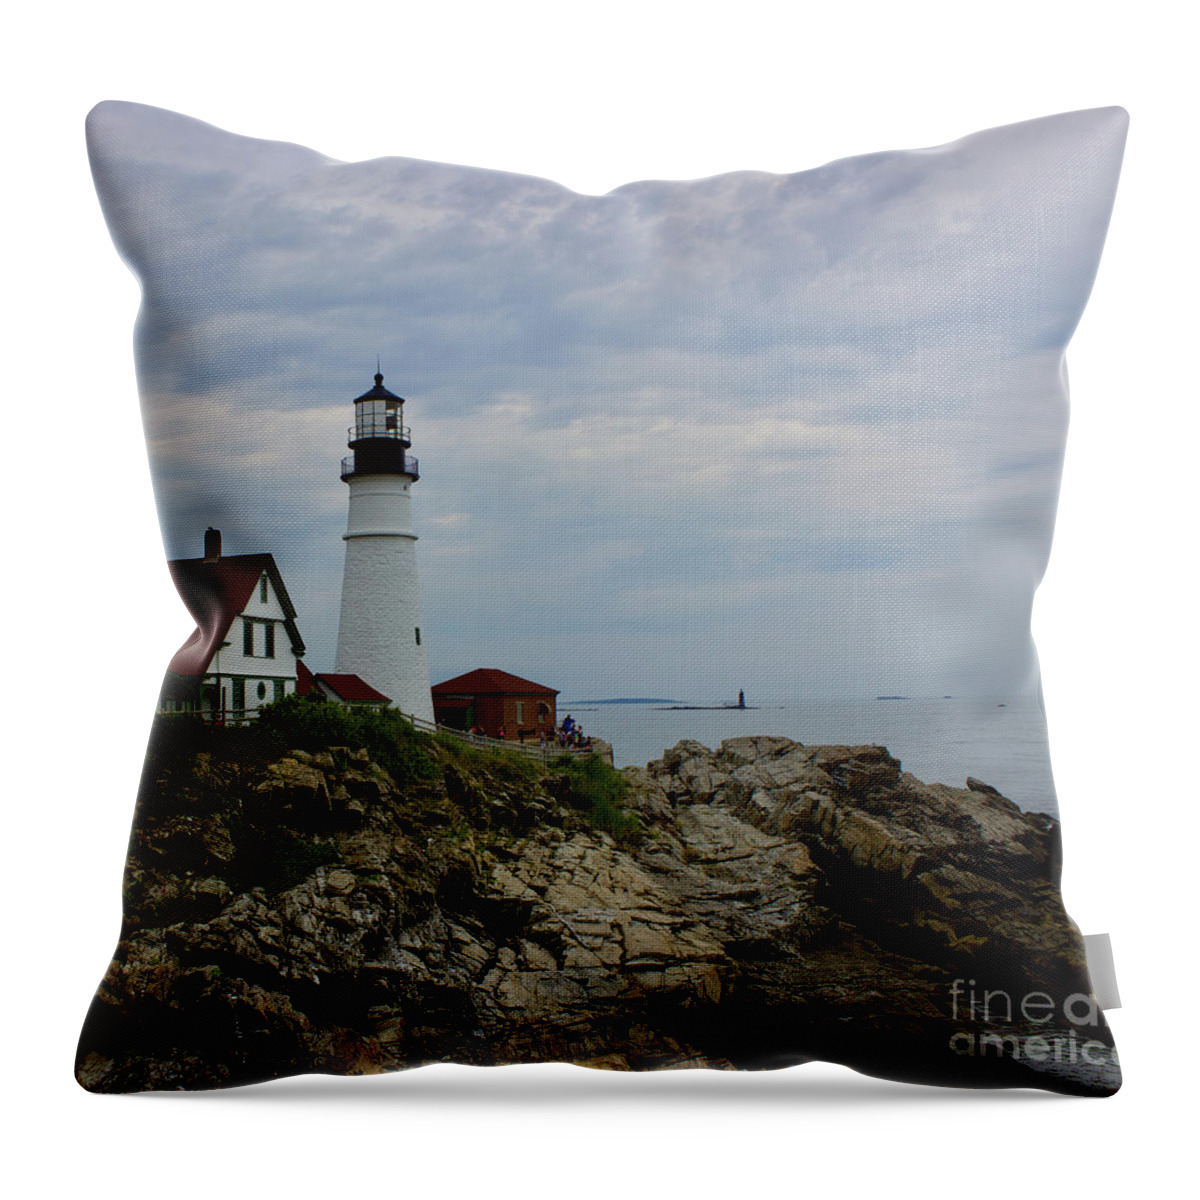  Throw Pillow featuring the pyrography Portland Lighthouse #1 by Annamaria Frost